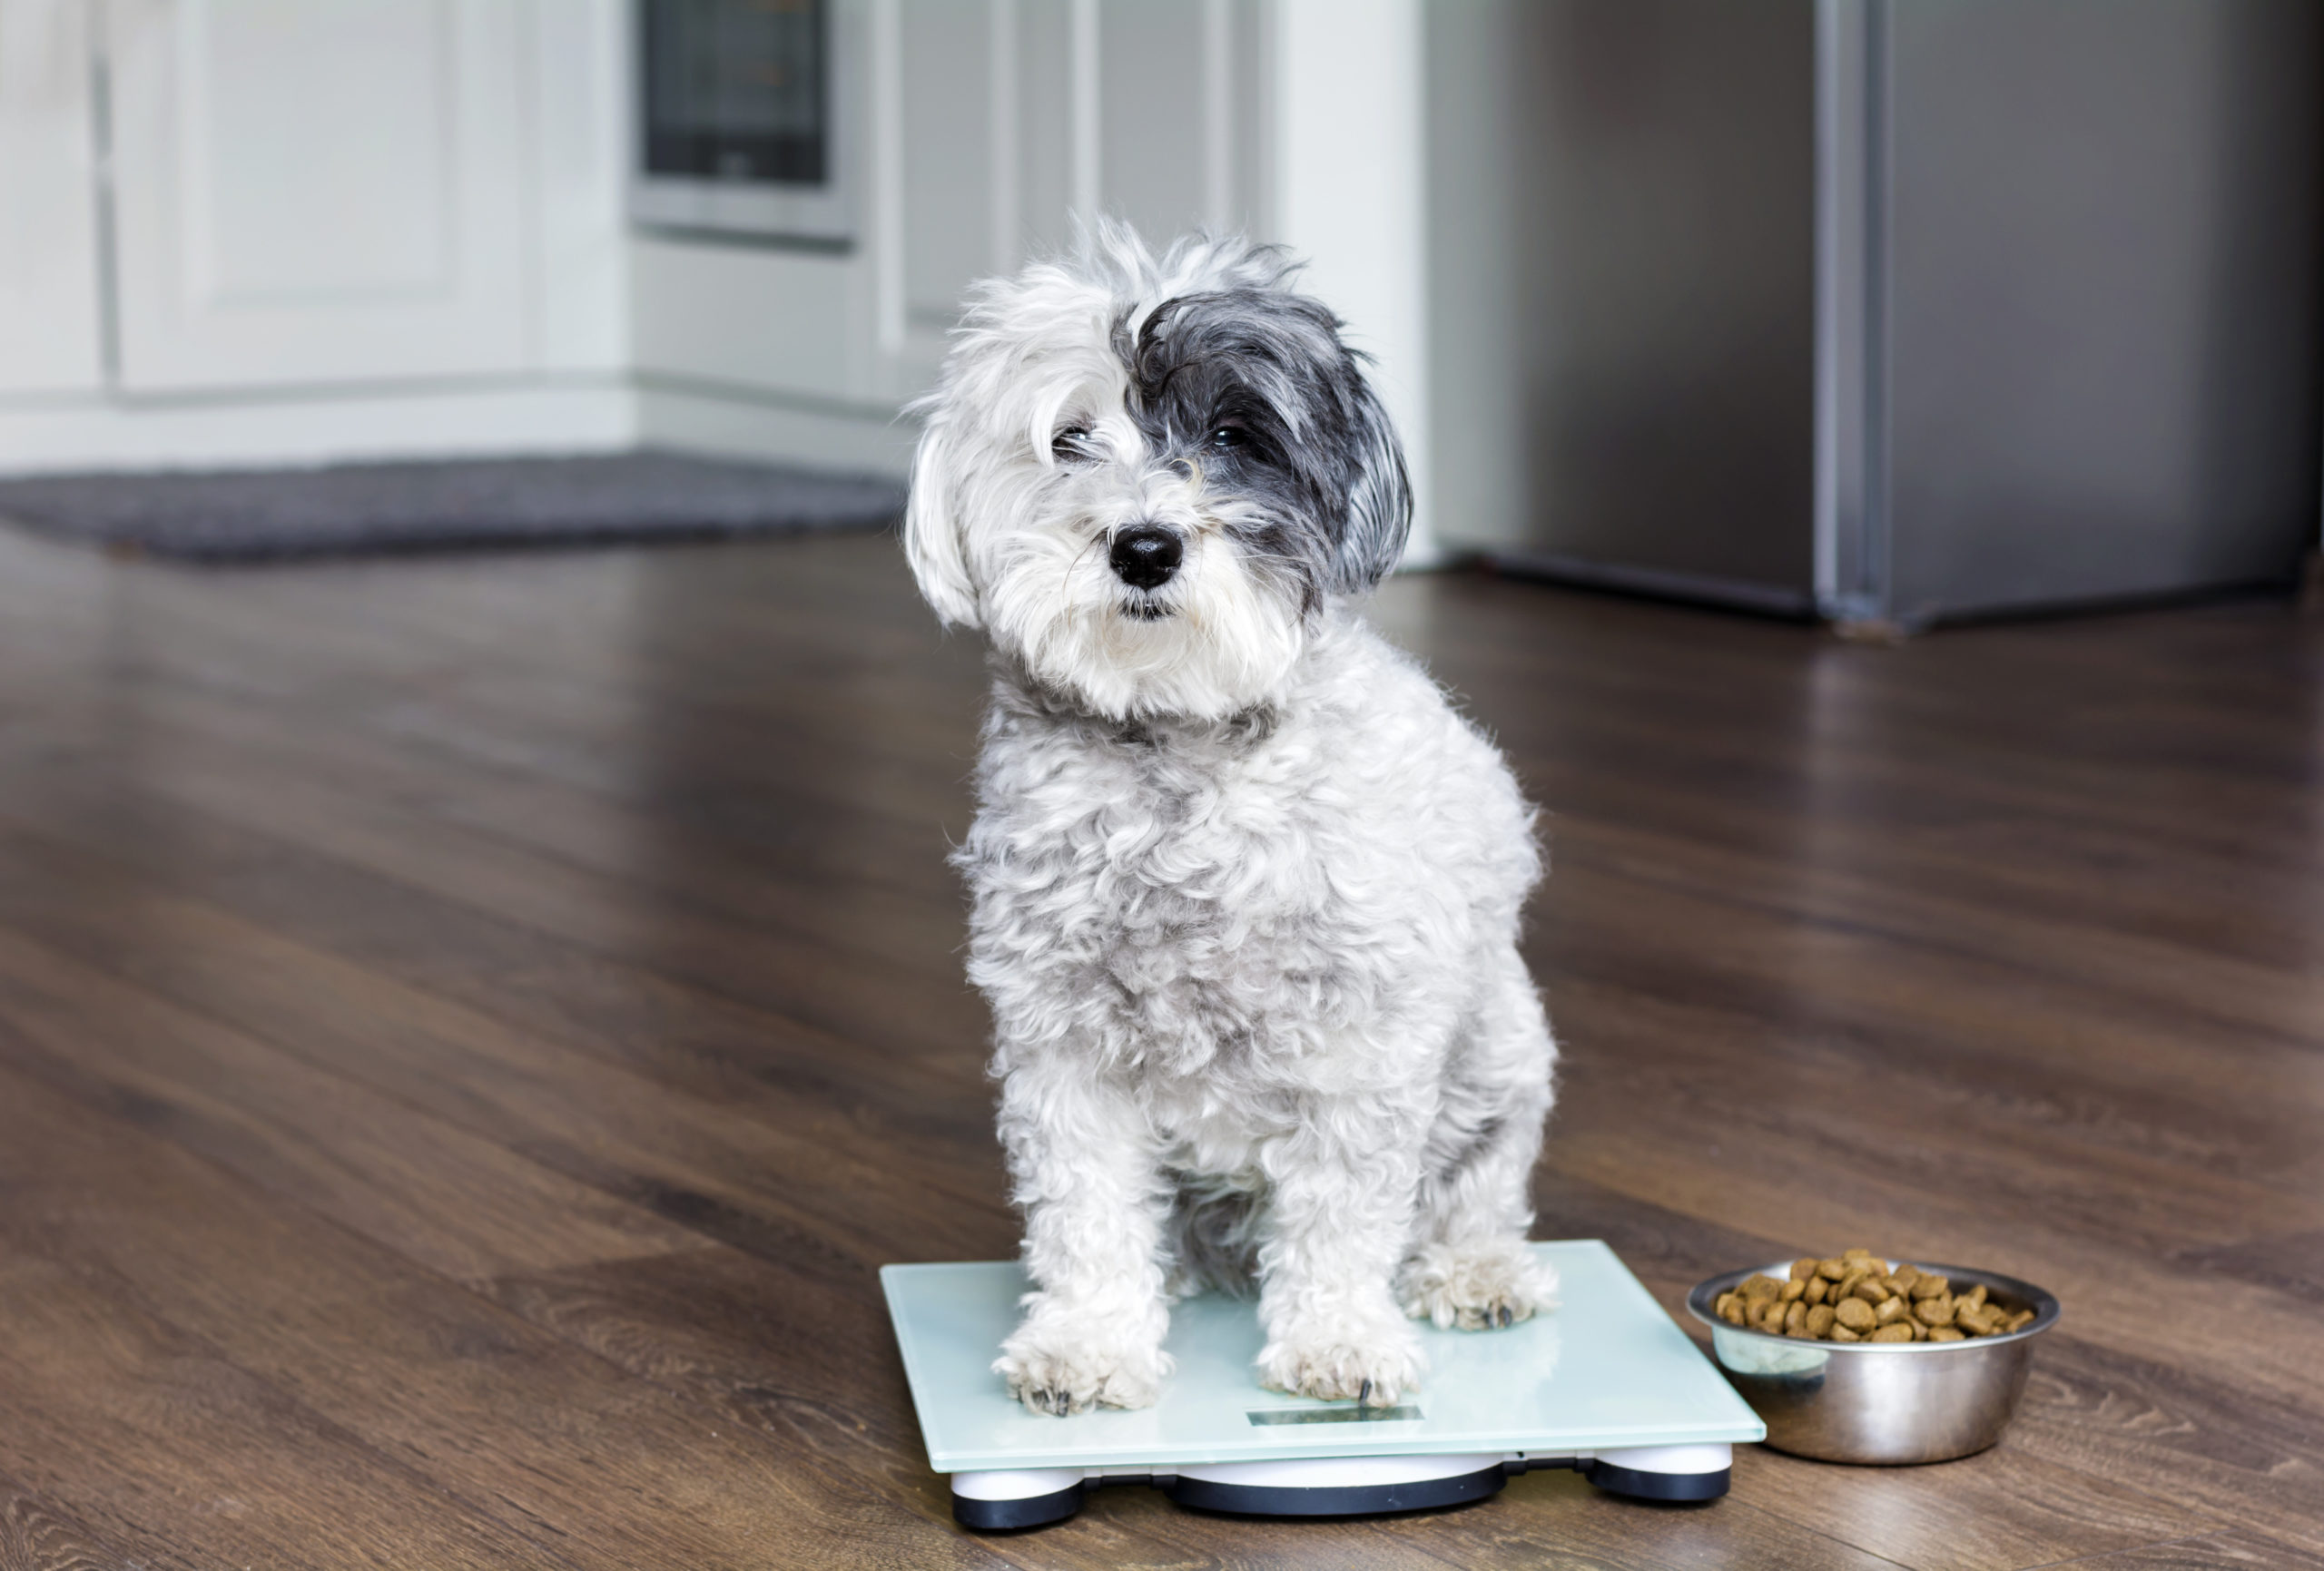 Obesity in Dogs: Is It Too Bad